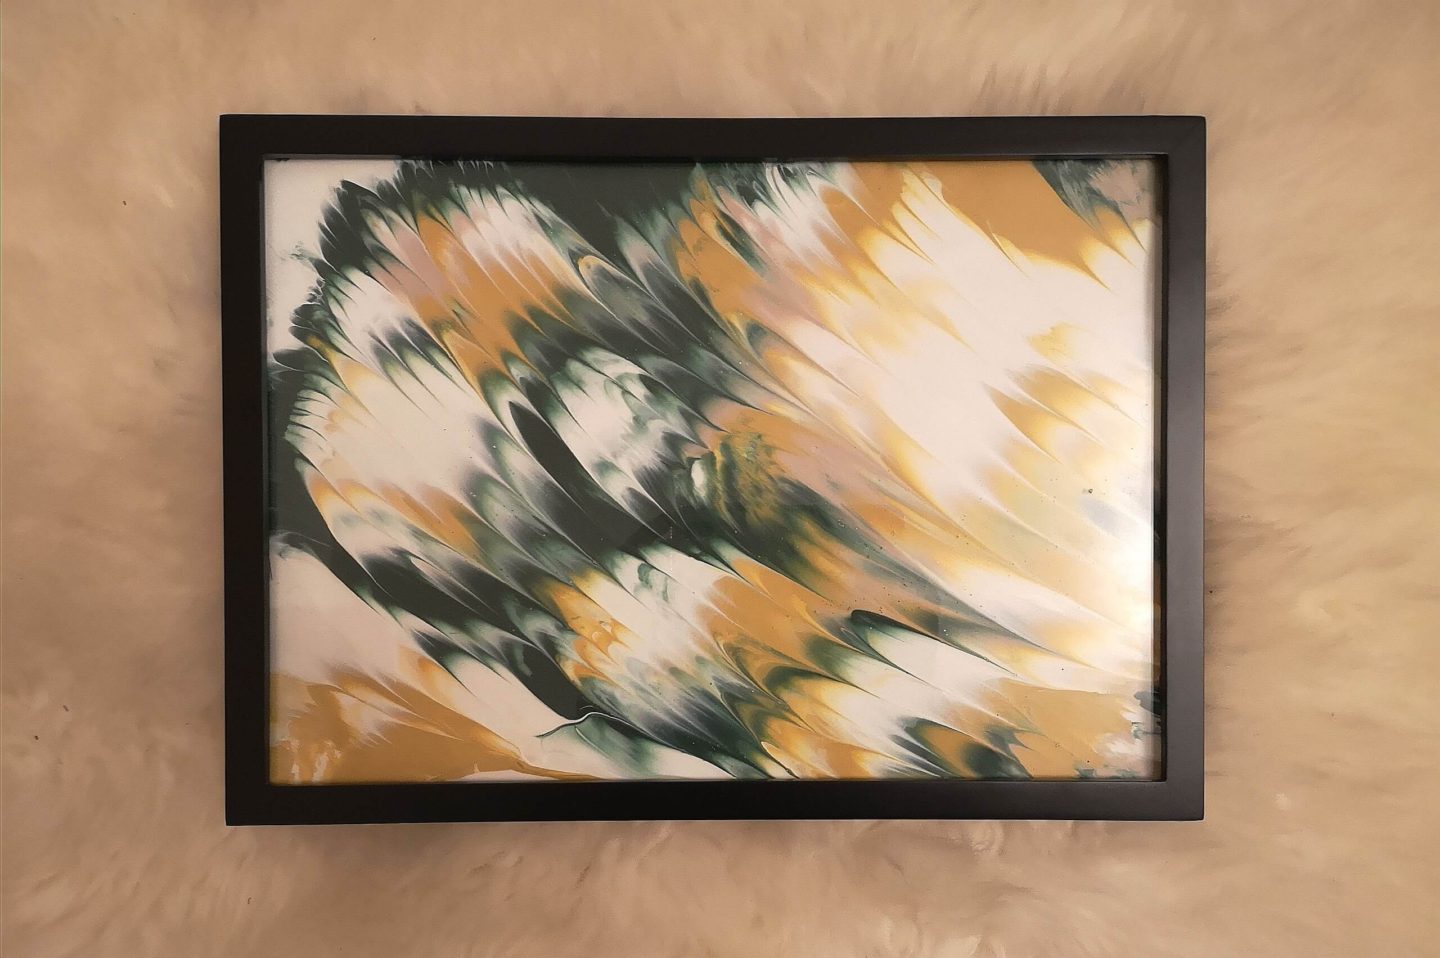 A colourful piece of art in a black frame, lying on a sheepskin rug. The colours in the artwork are white, green, yellow and pink.